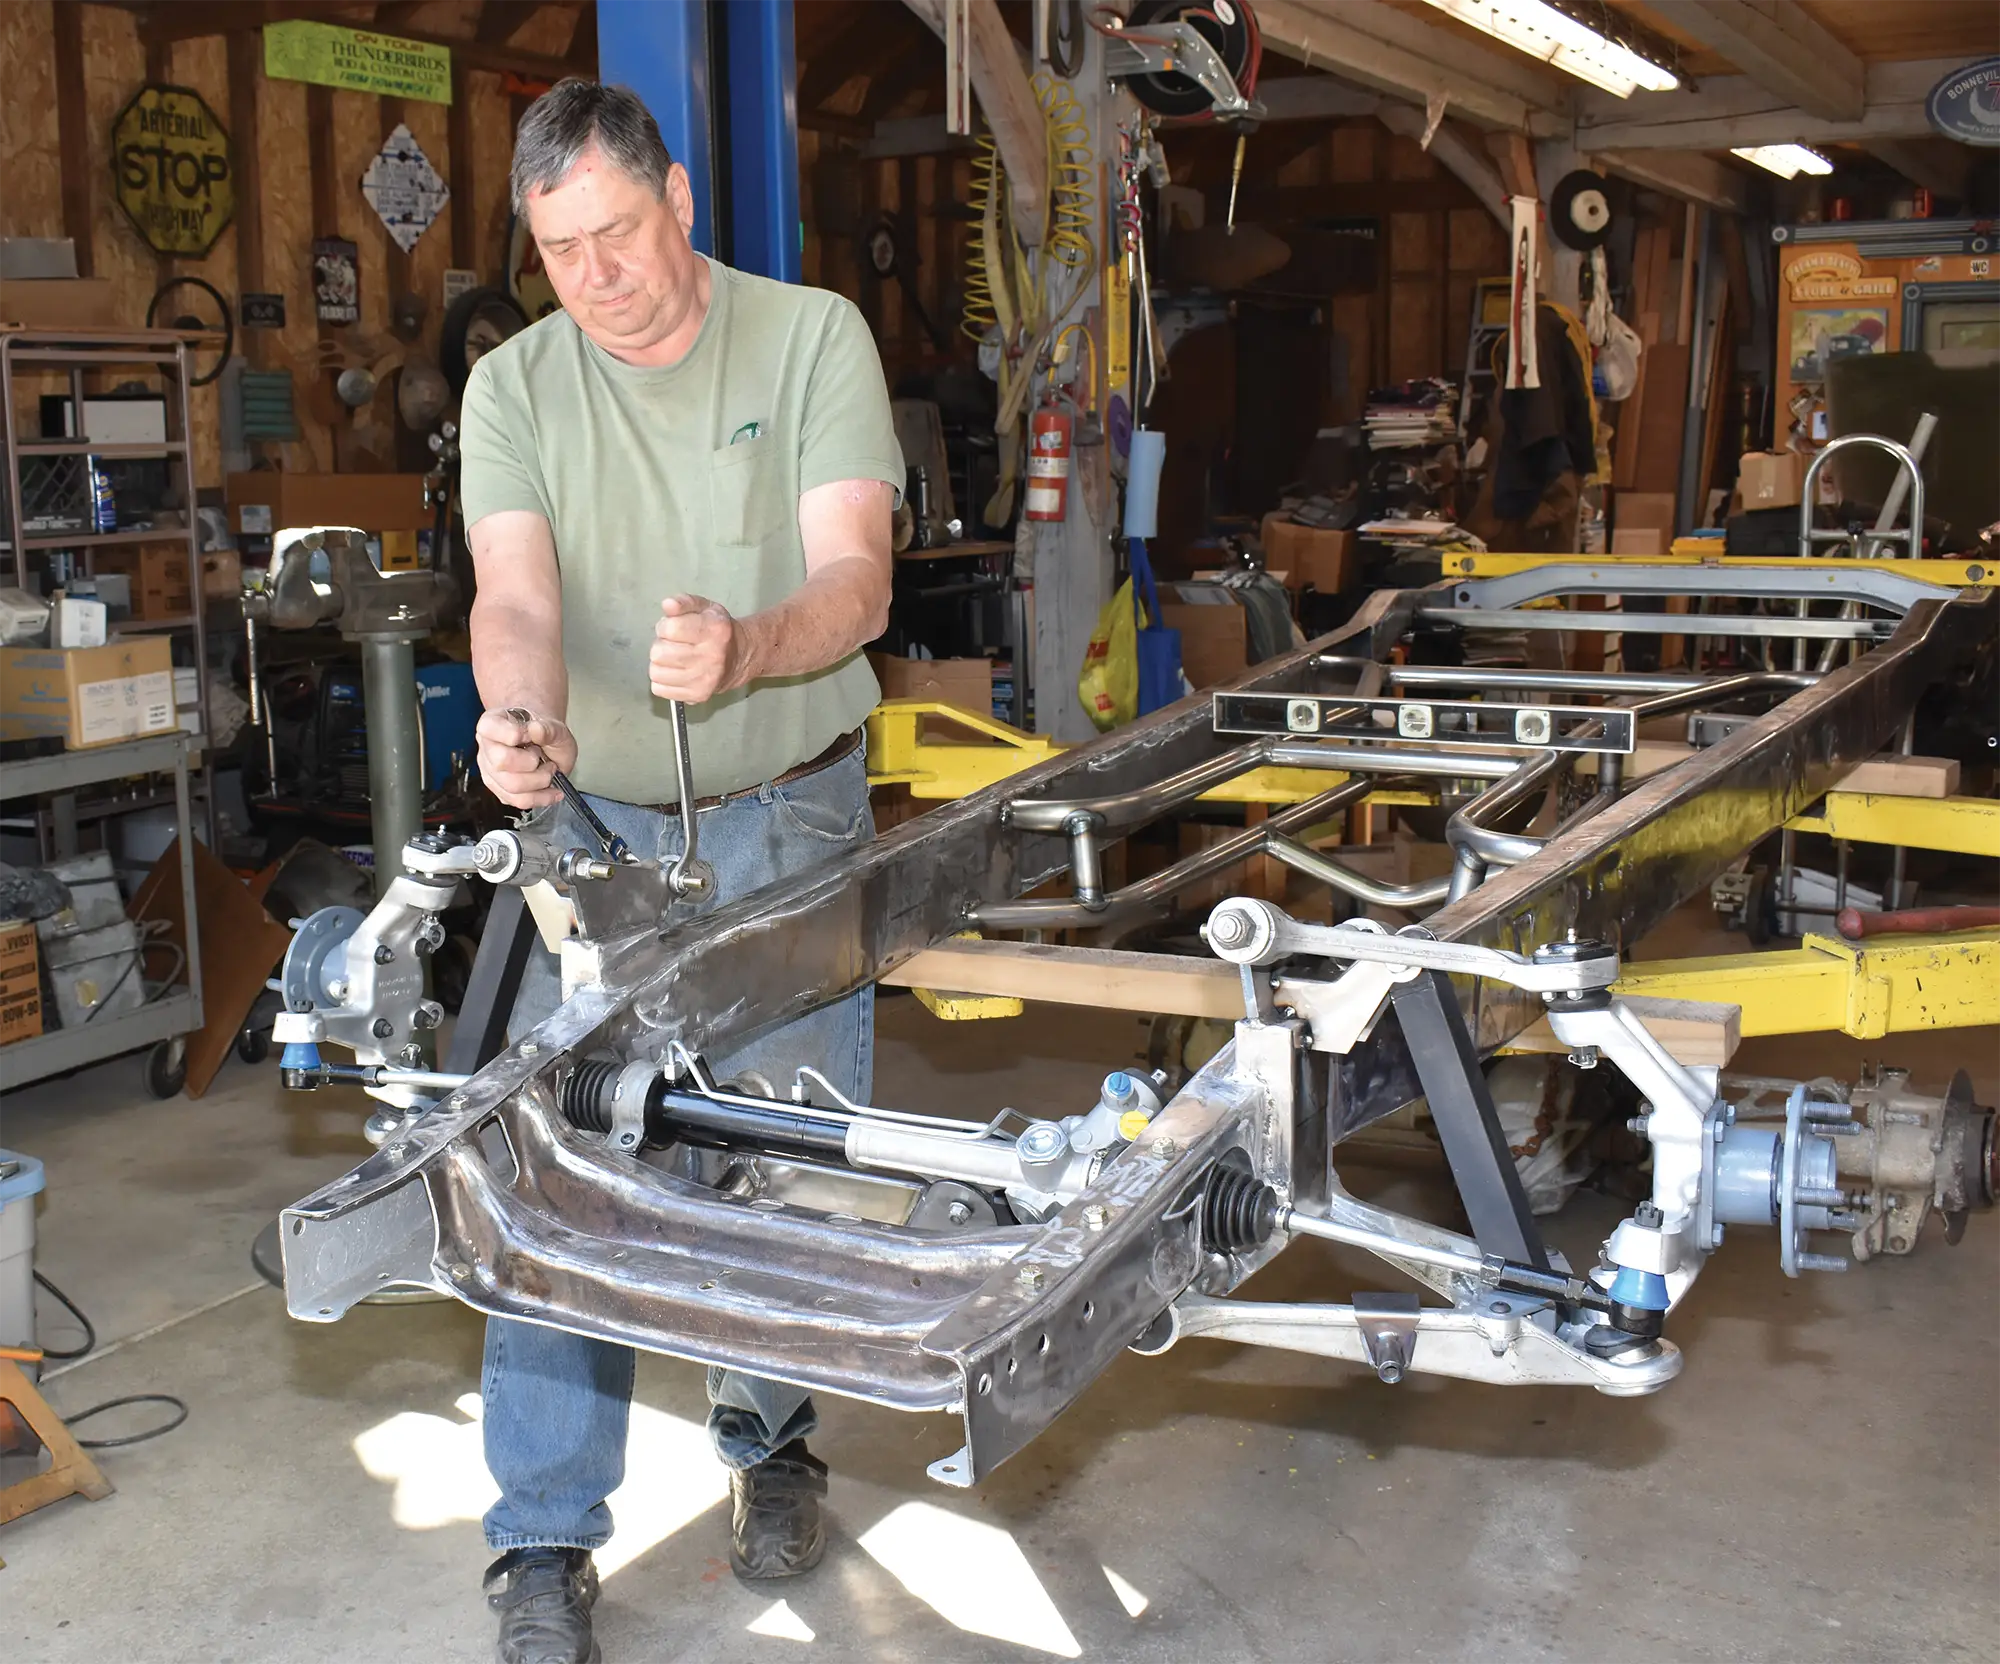 Paul Wilson finishes the preliminary installation of Flat Out Engineering’s Corvette C4 front suspension on his Chevy pickup’s frame. Yet to come are the brakes and the Aldan coilovers.